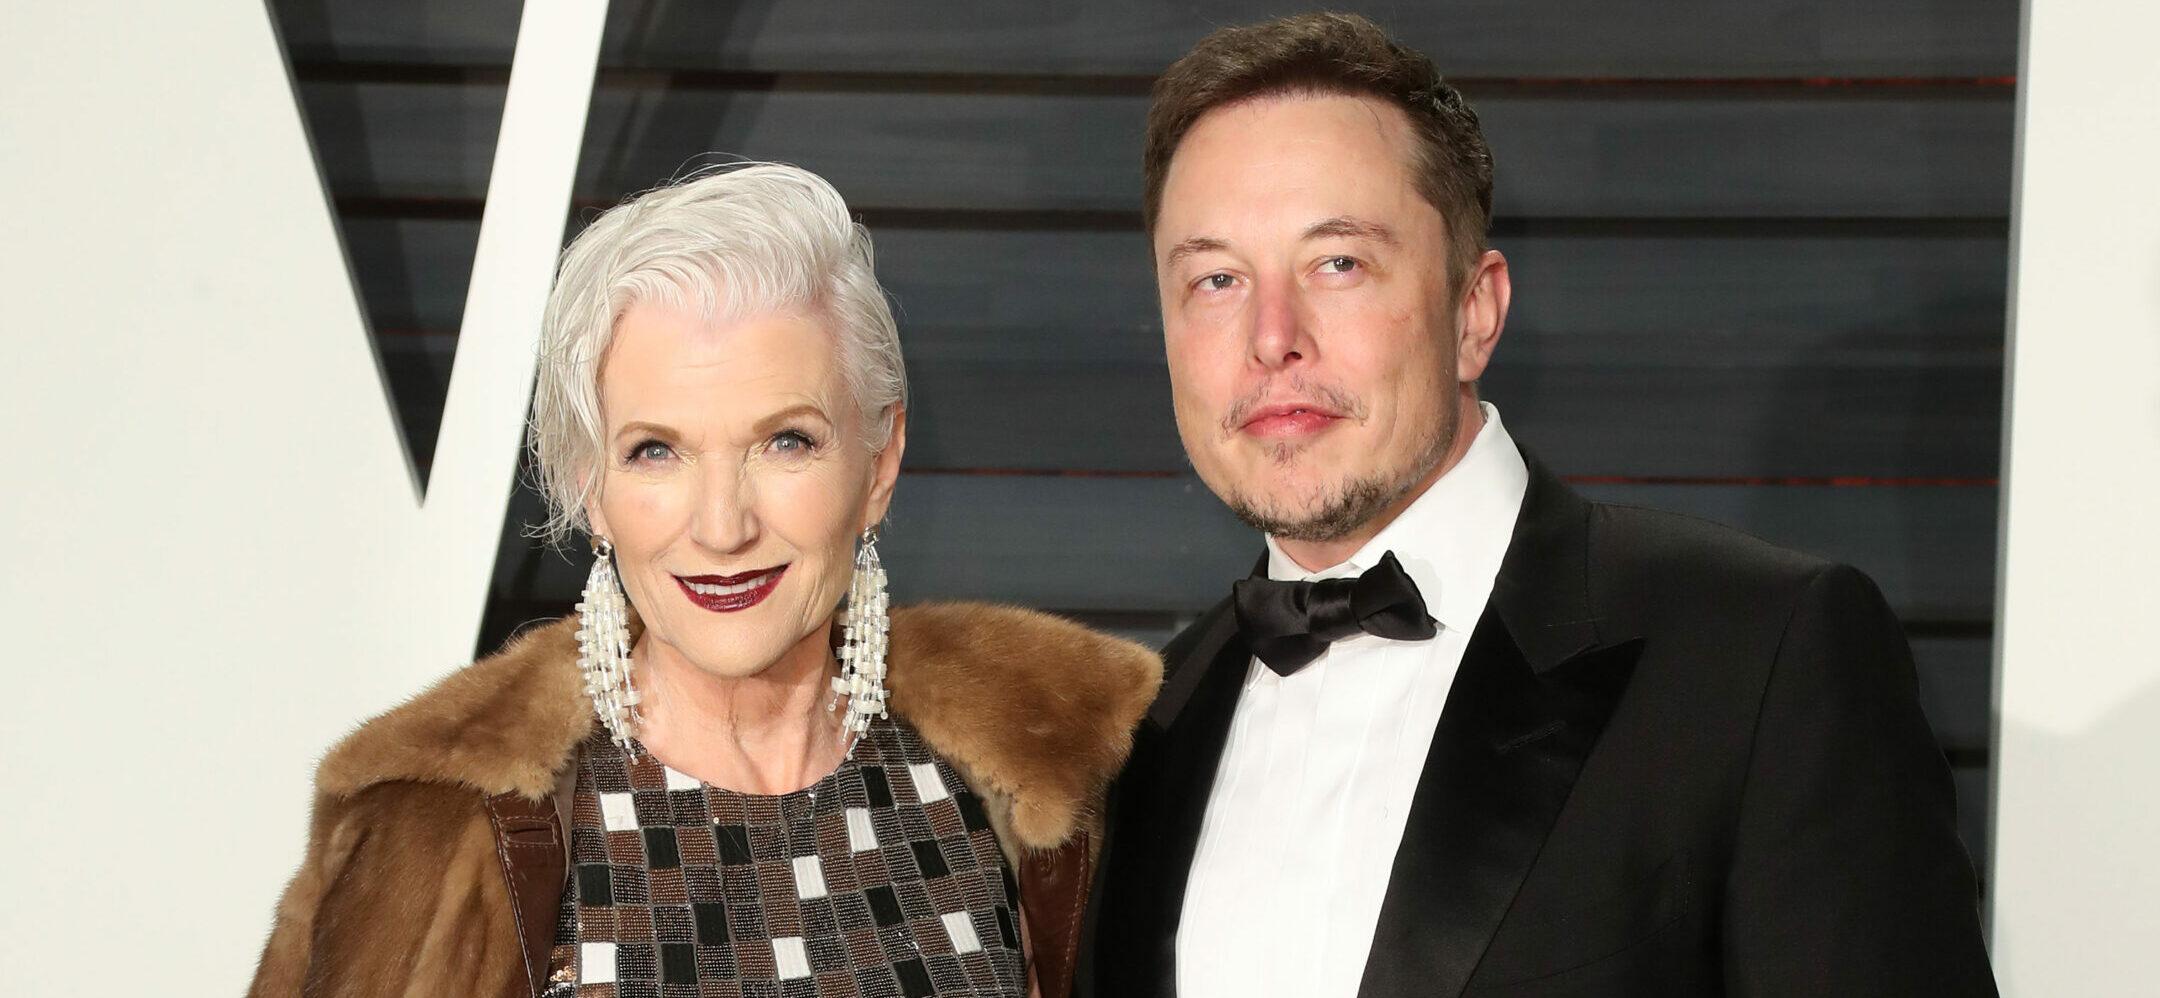 Maye Musk Explains Why She Sleeps In A Garage While Visiting Son Elon Musk In Texas